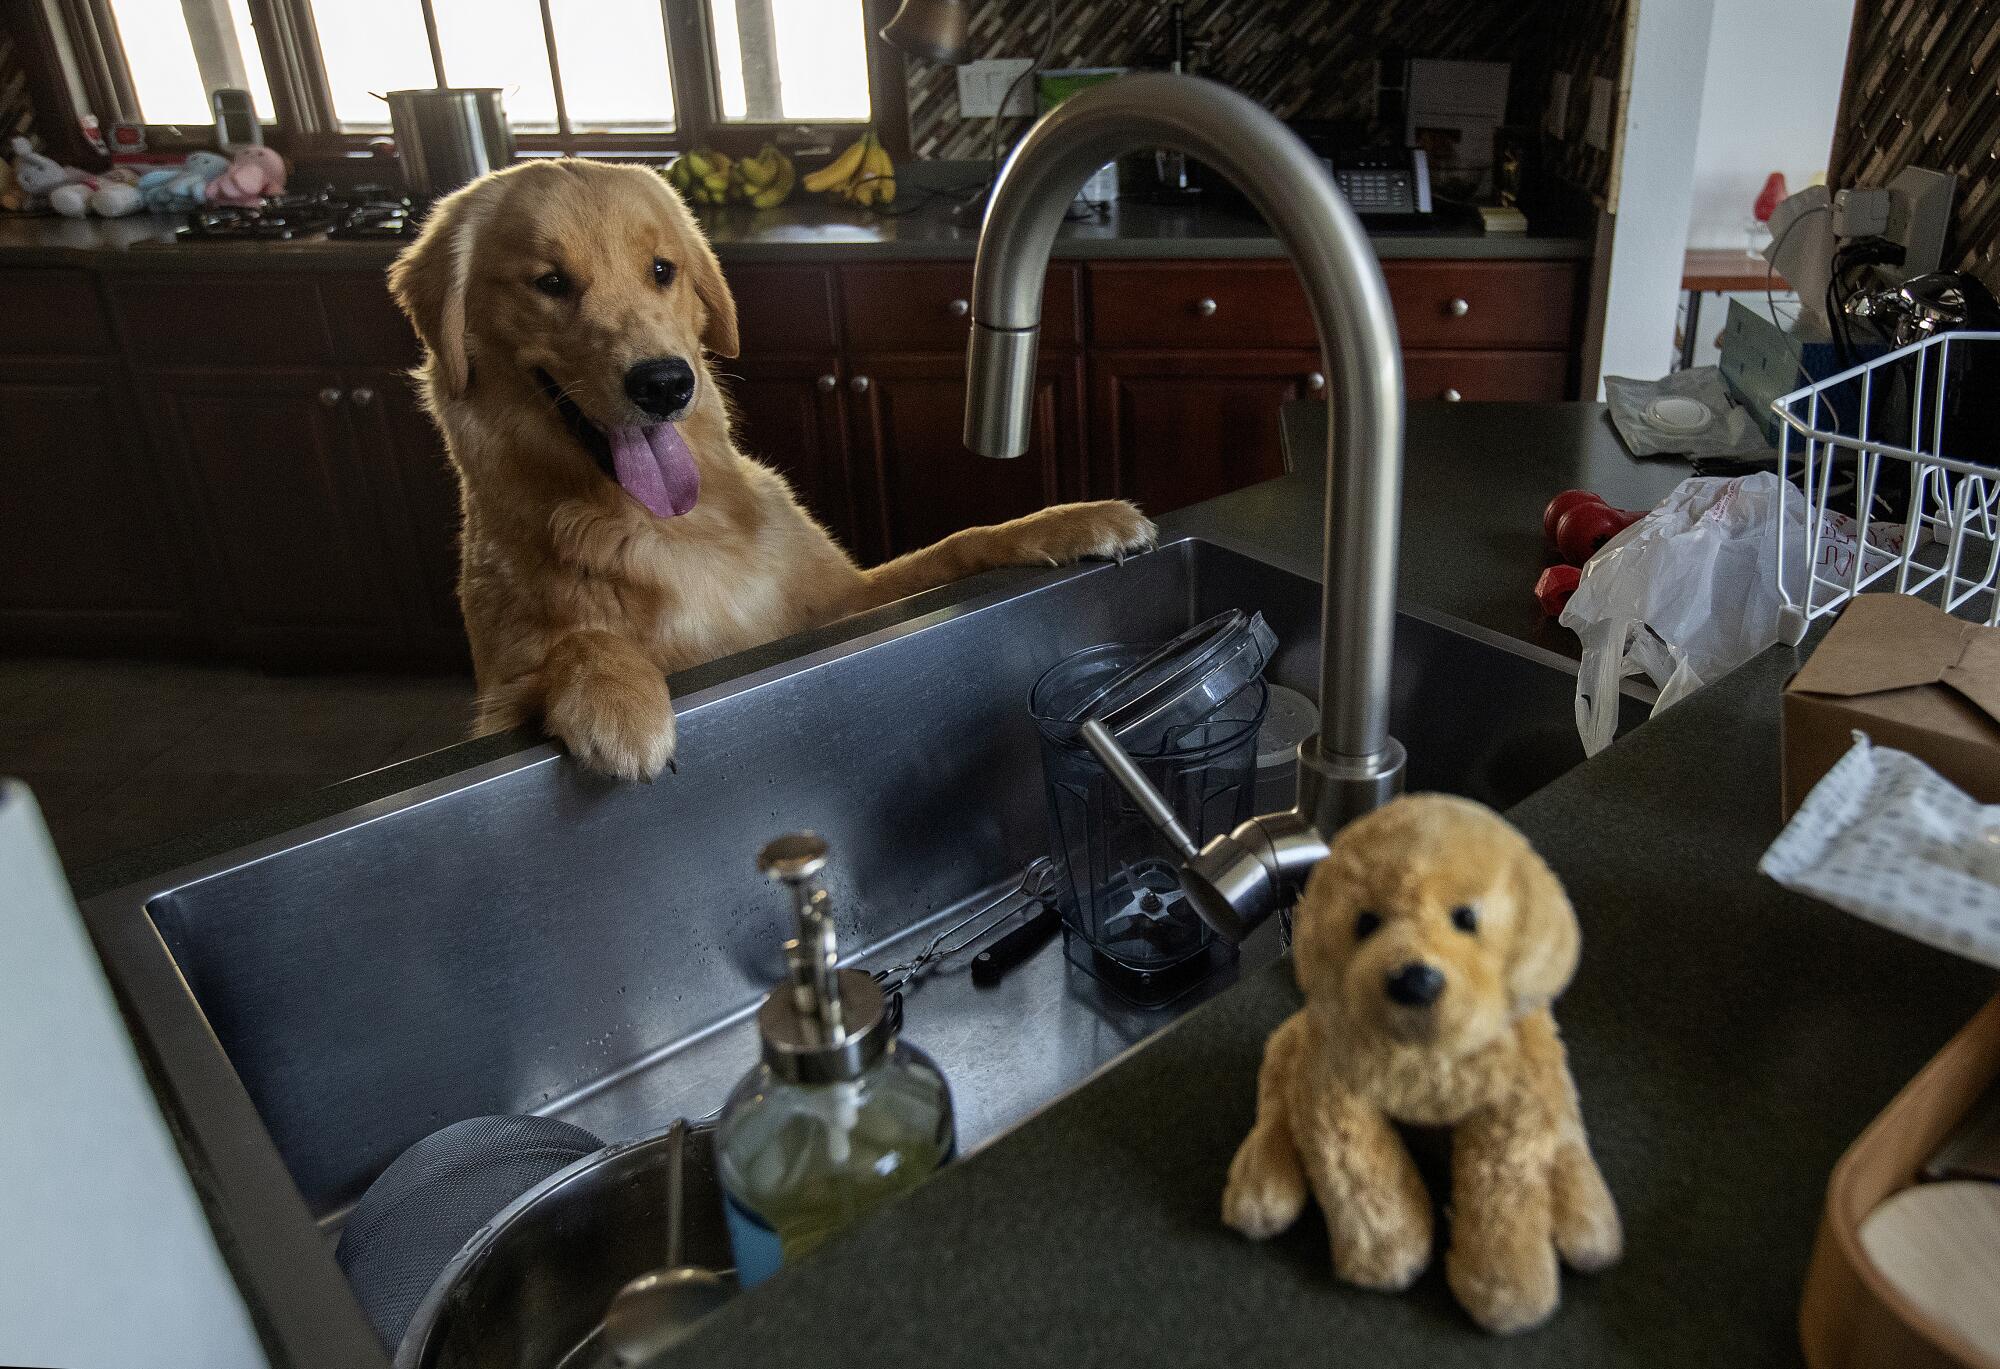 A golden retriever at a kitchen sink with a stuffed dog nearby.